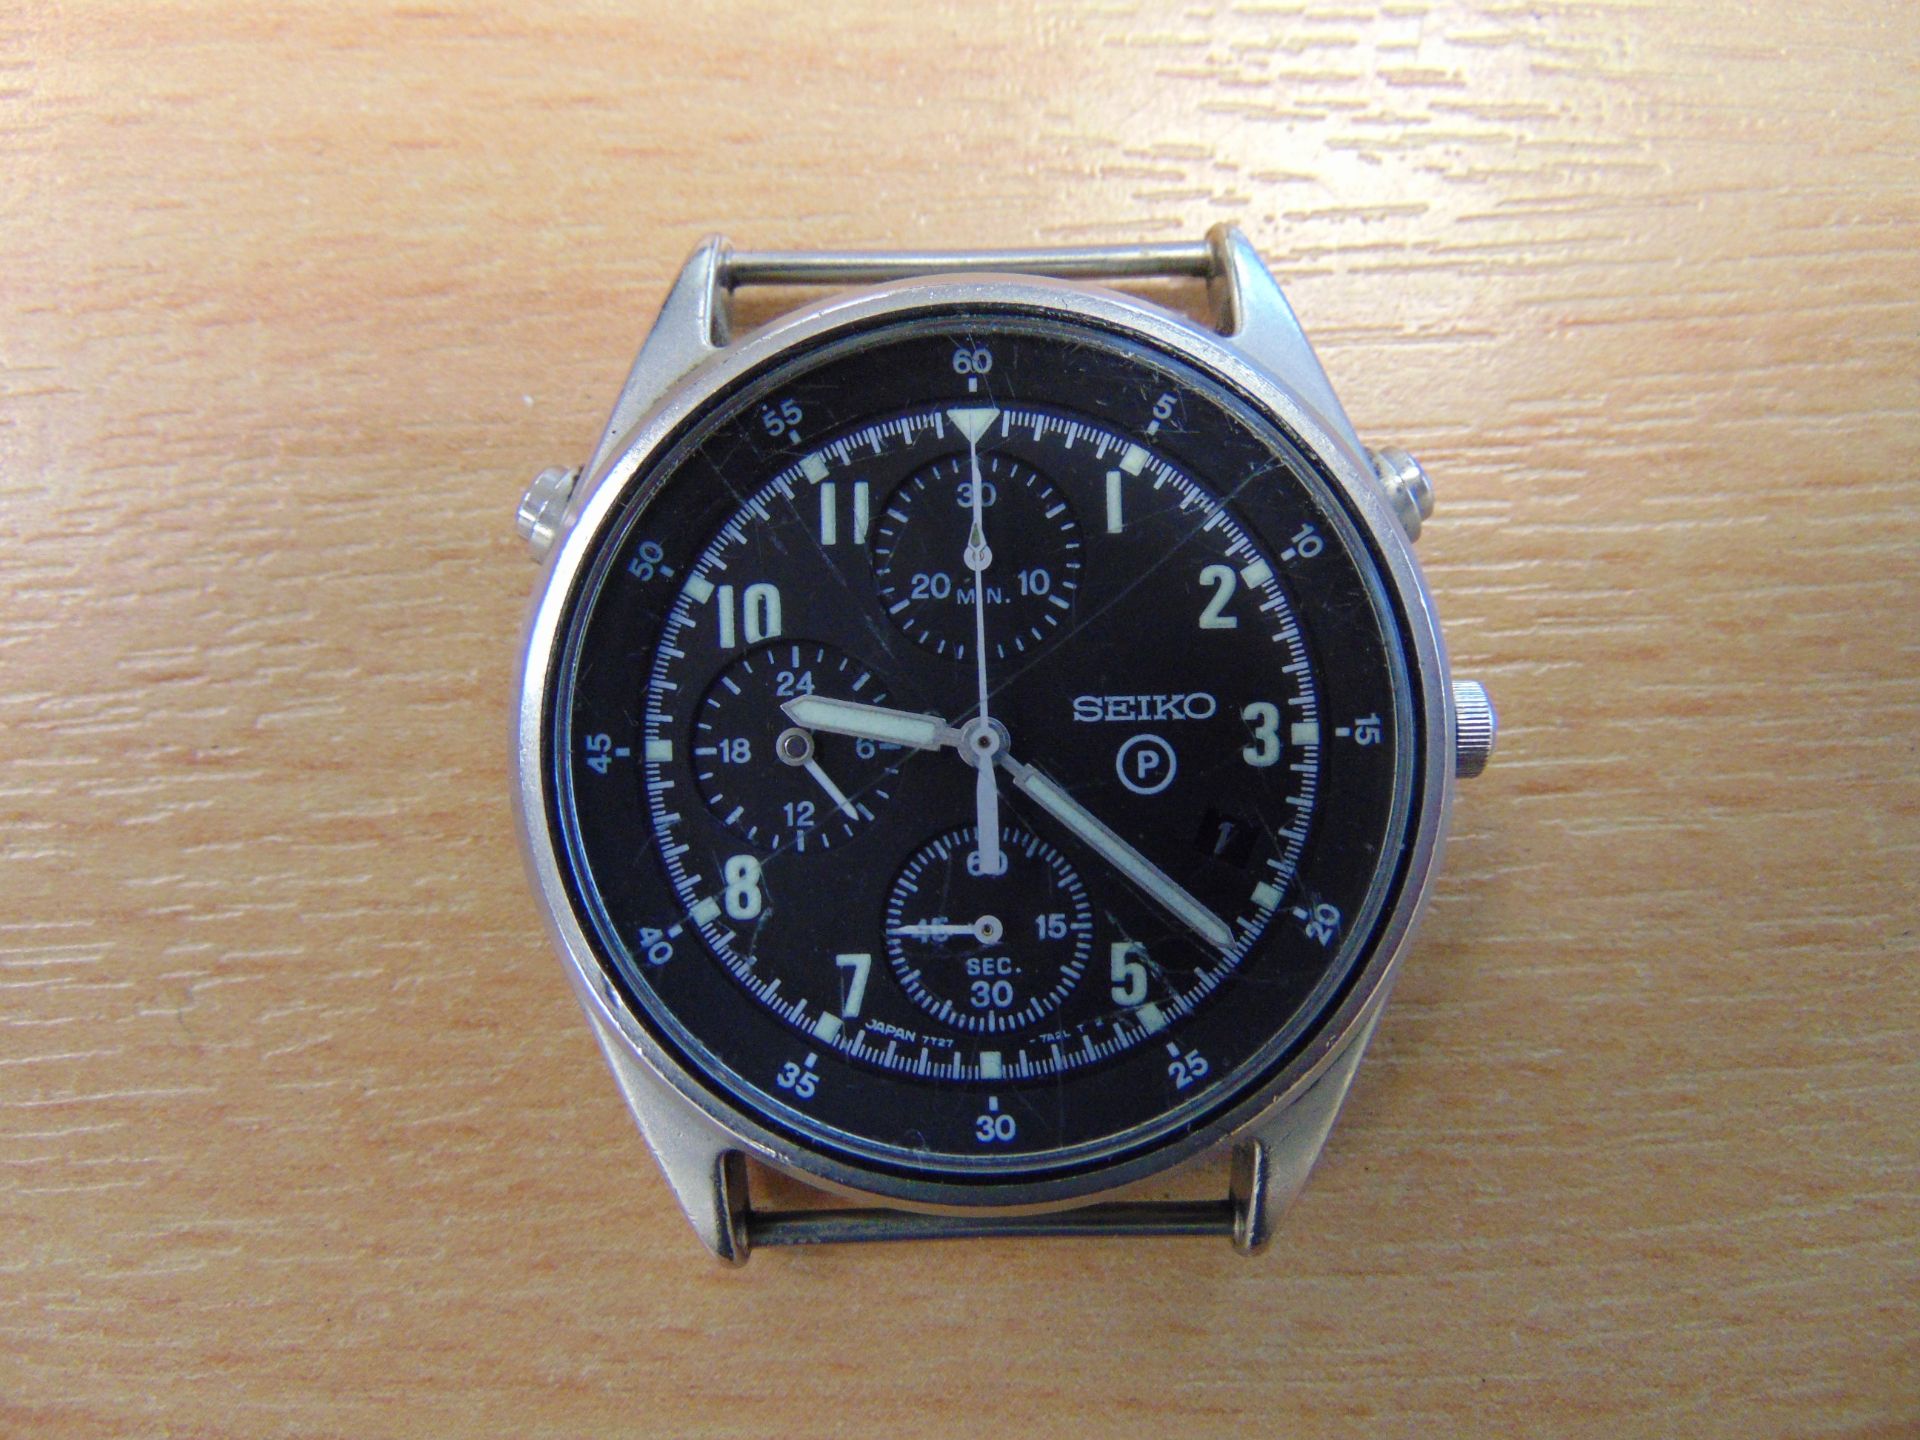 Seiko Gen 2 Pilots Chrono RAF Tornado Force Issue with Date Adjust Nato Marks, LOW SNo 161 - Image 2 of 4